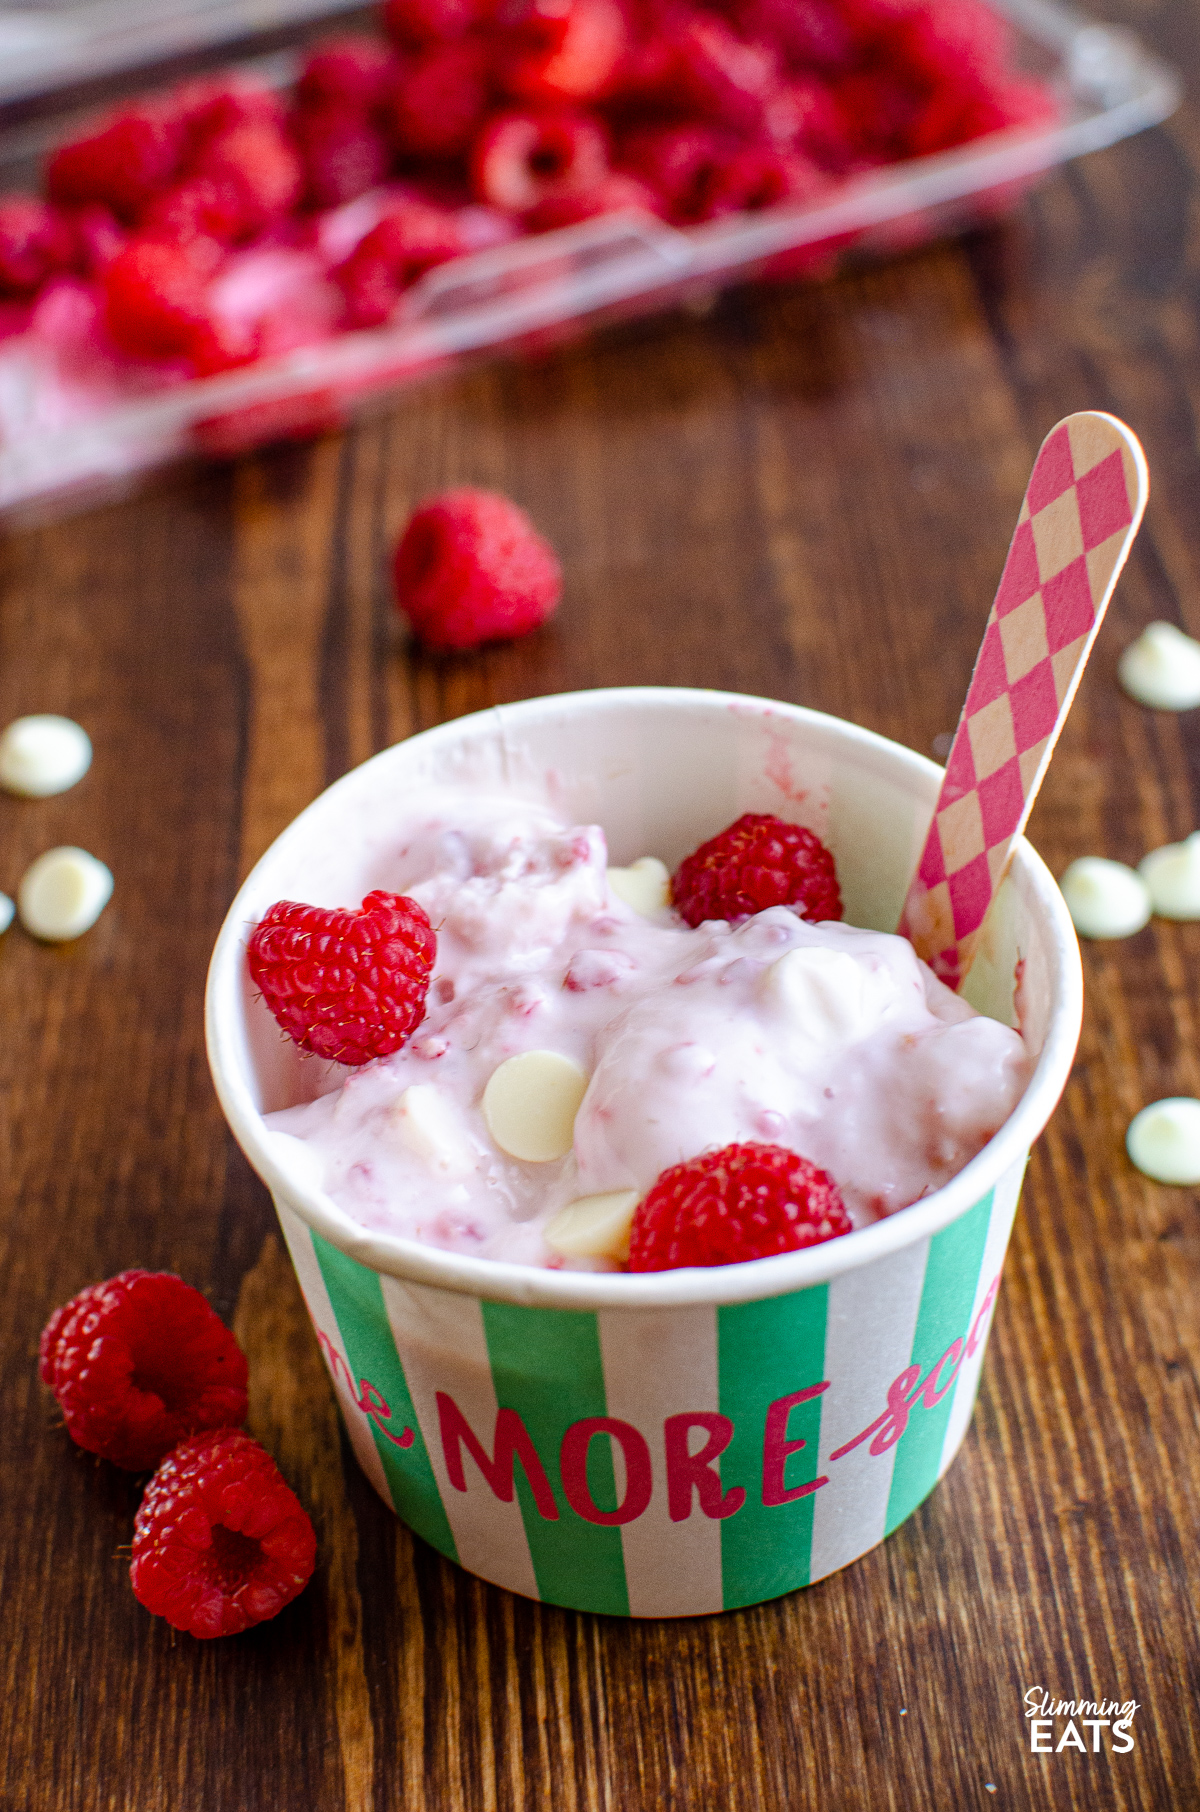 Raspberry and White Chocolate Frozen Yoghurt in a icecream tub with pink diamond patterned wooden spoon, and fresh raspberries  in background.